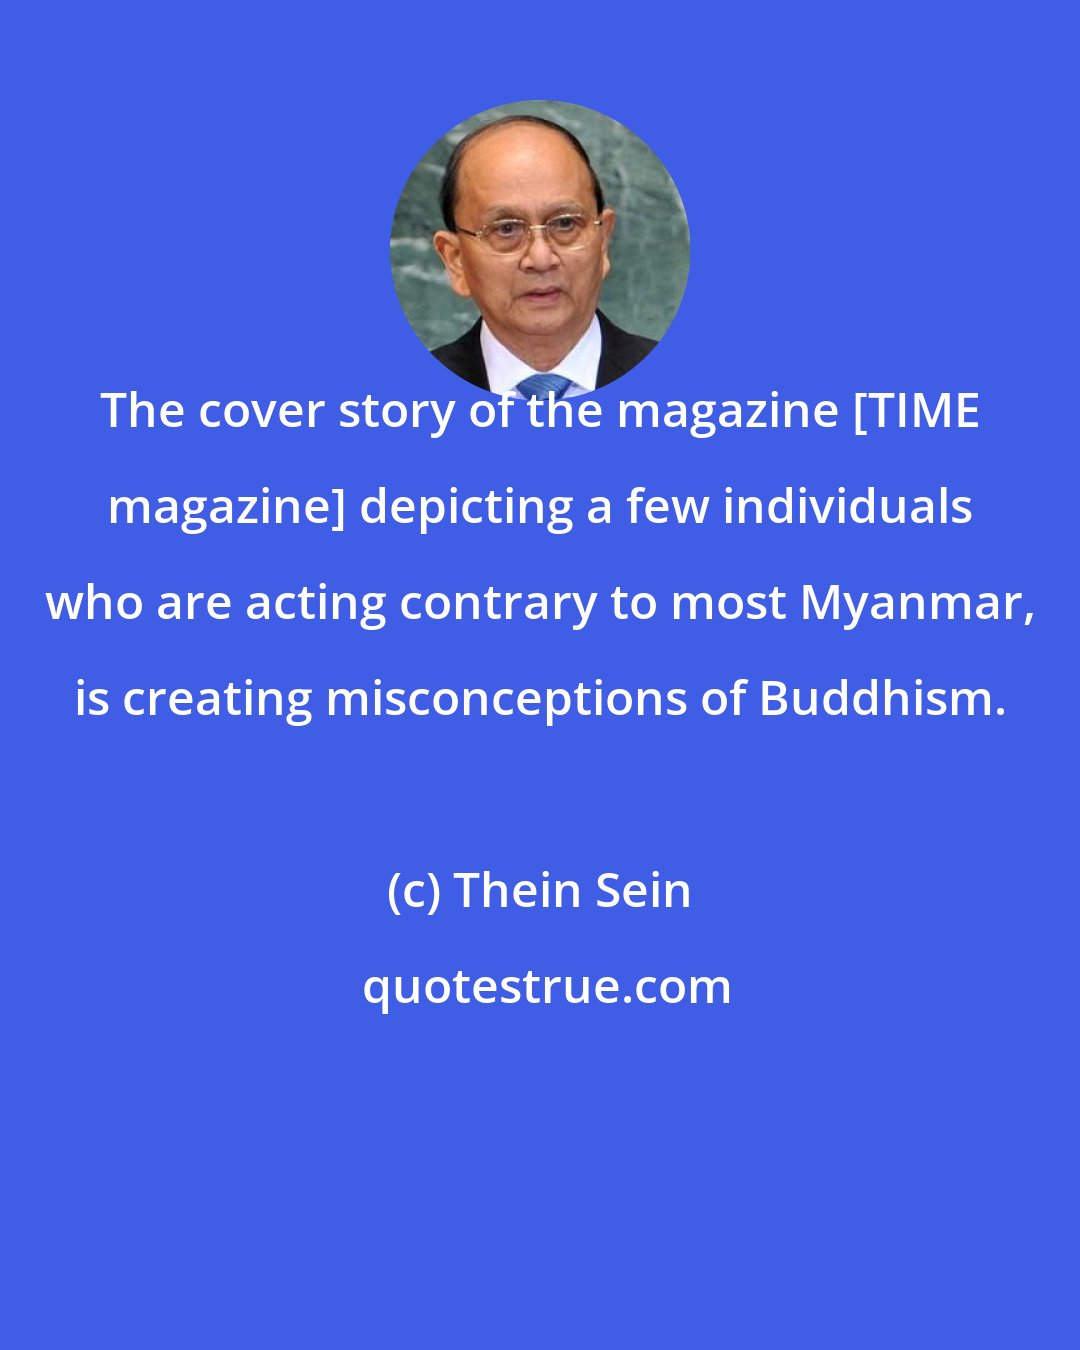 Thein Sein: The cover story of the magazine [TIME magazine] depicting a few individuals who are acting contrary to most Myanmar, is creating misconceptions of Buddhism.